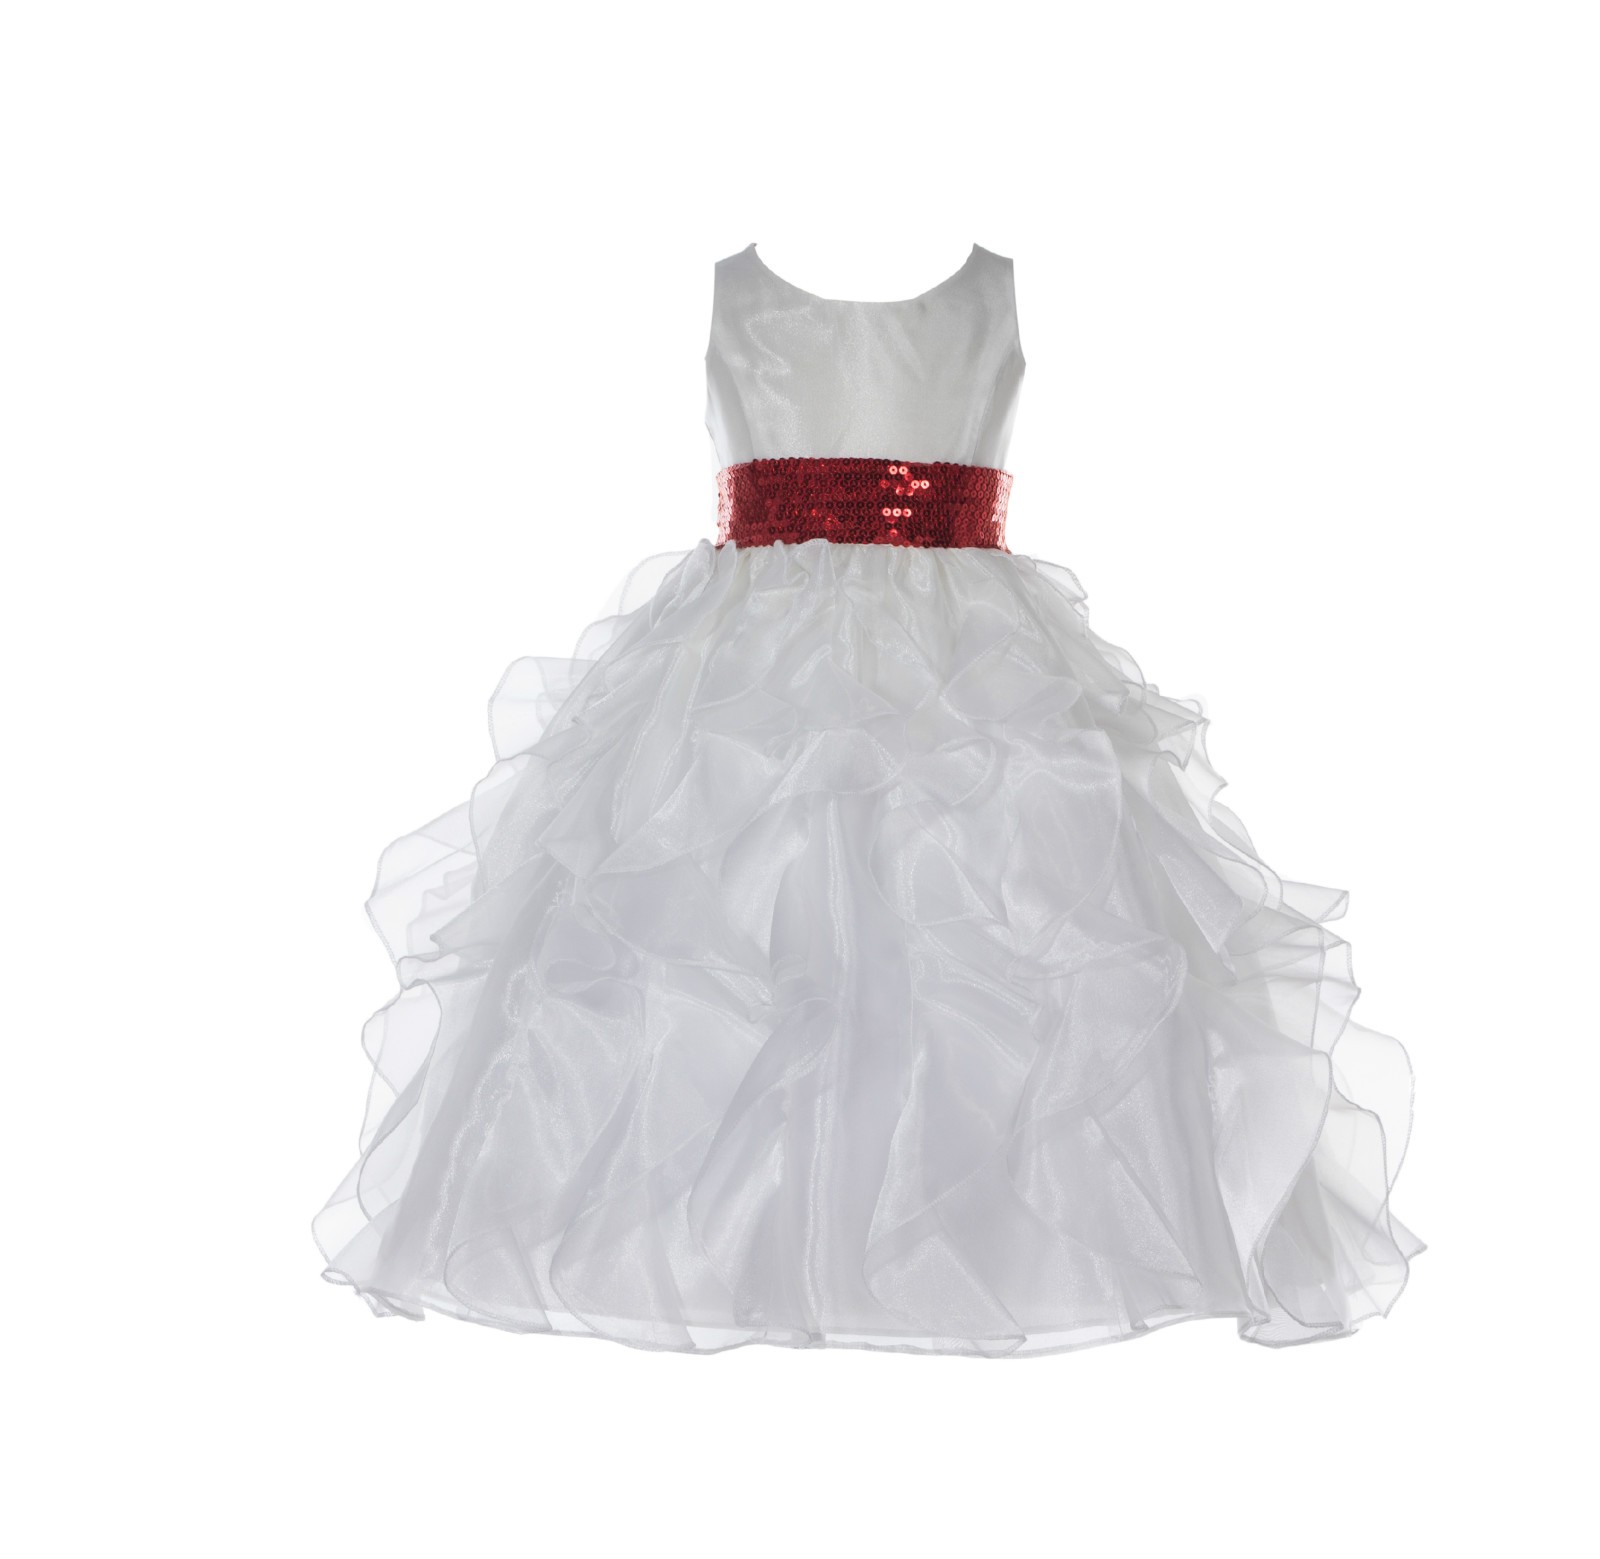 Ivory Ruffled Organza Red Sequin Sash Flower Girl Dress 168mh